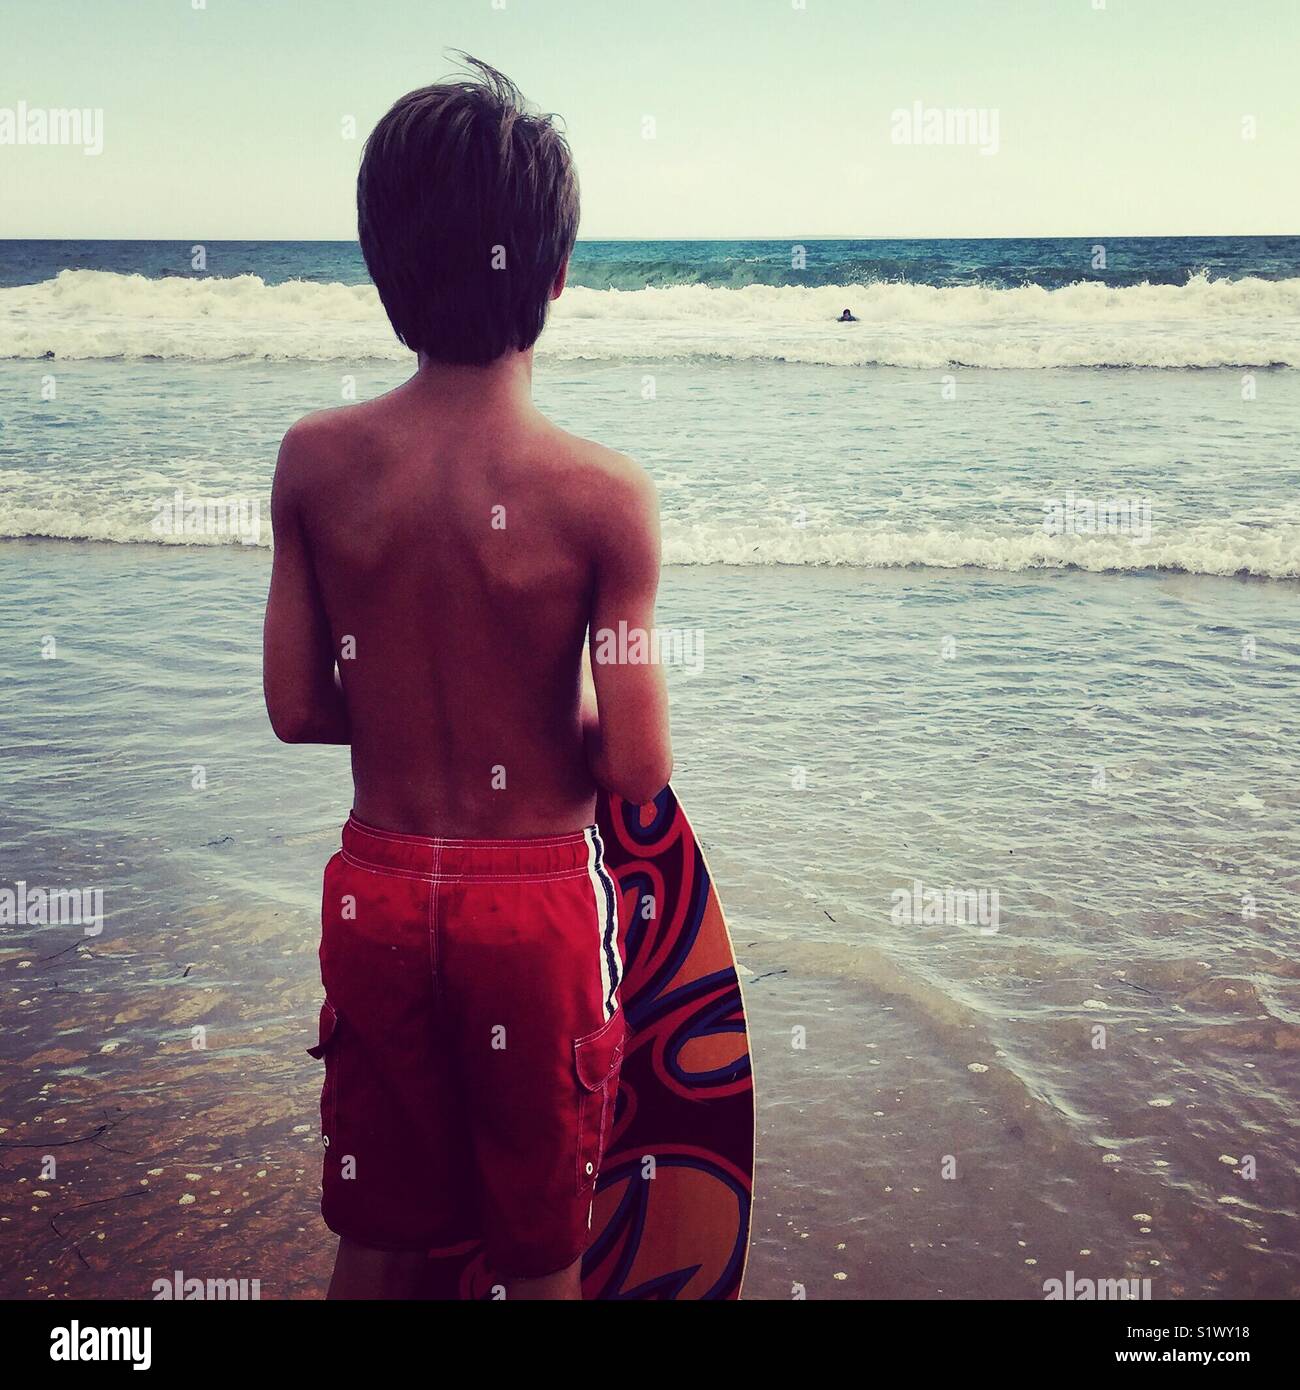 Boy waiting for perfect wave for skim boarding Stock Photo